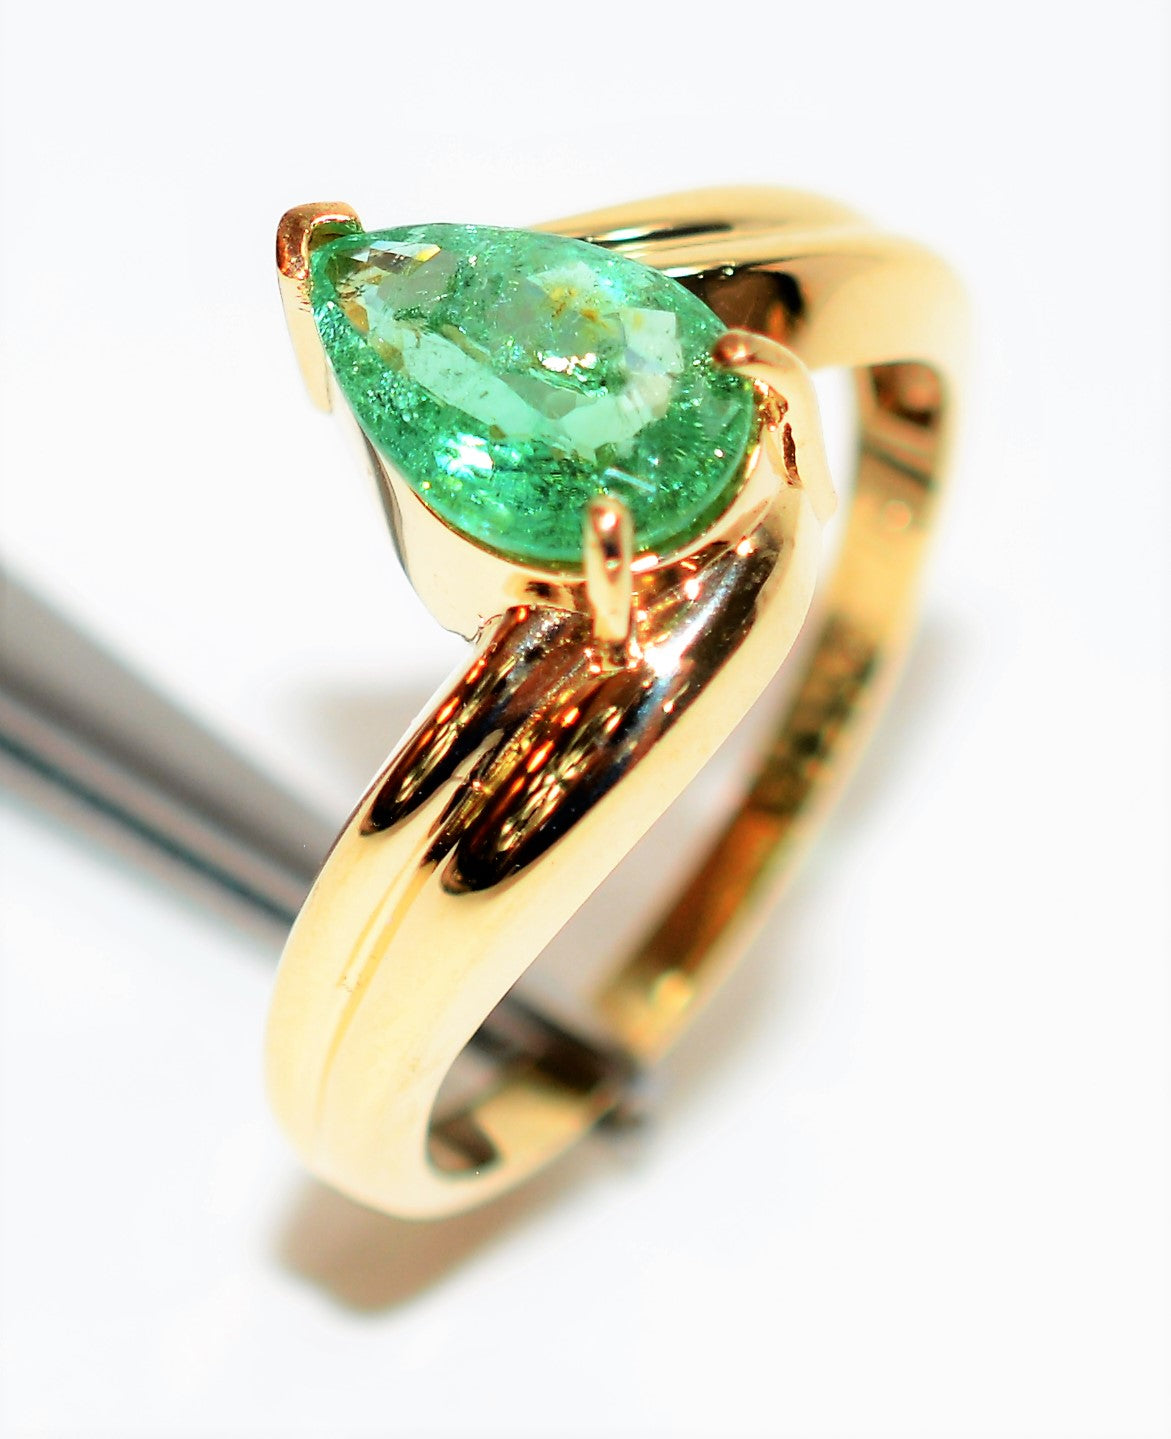 Natural Paraiba Tourmaline Ring 10K Solid Gold 1.27ct Solitaire Ring Pear Ring Gemstone Ring Women's Ring Ladies Ring Statement Ring Jewelry